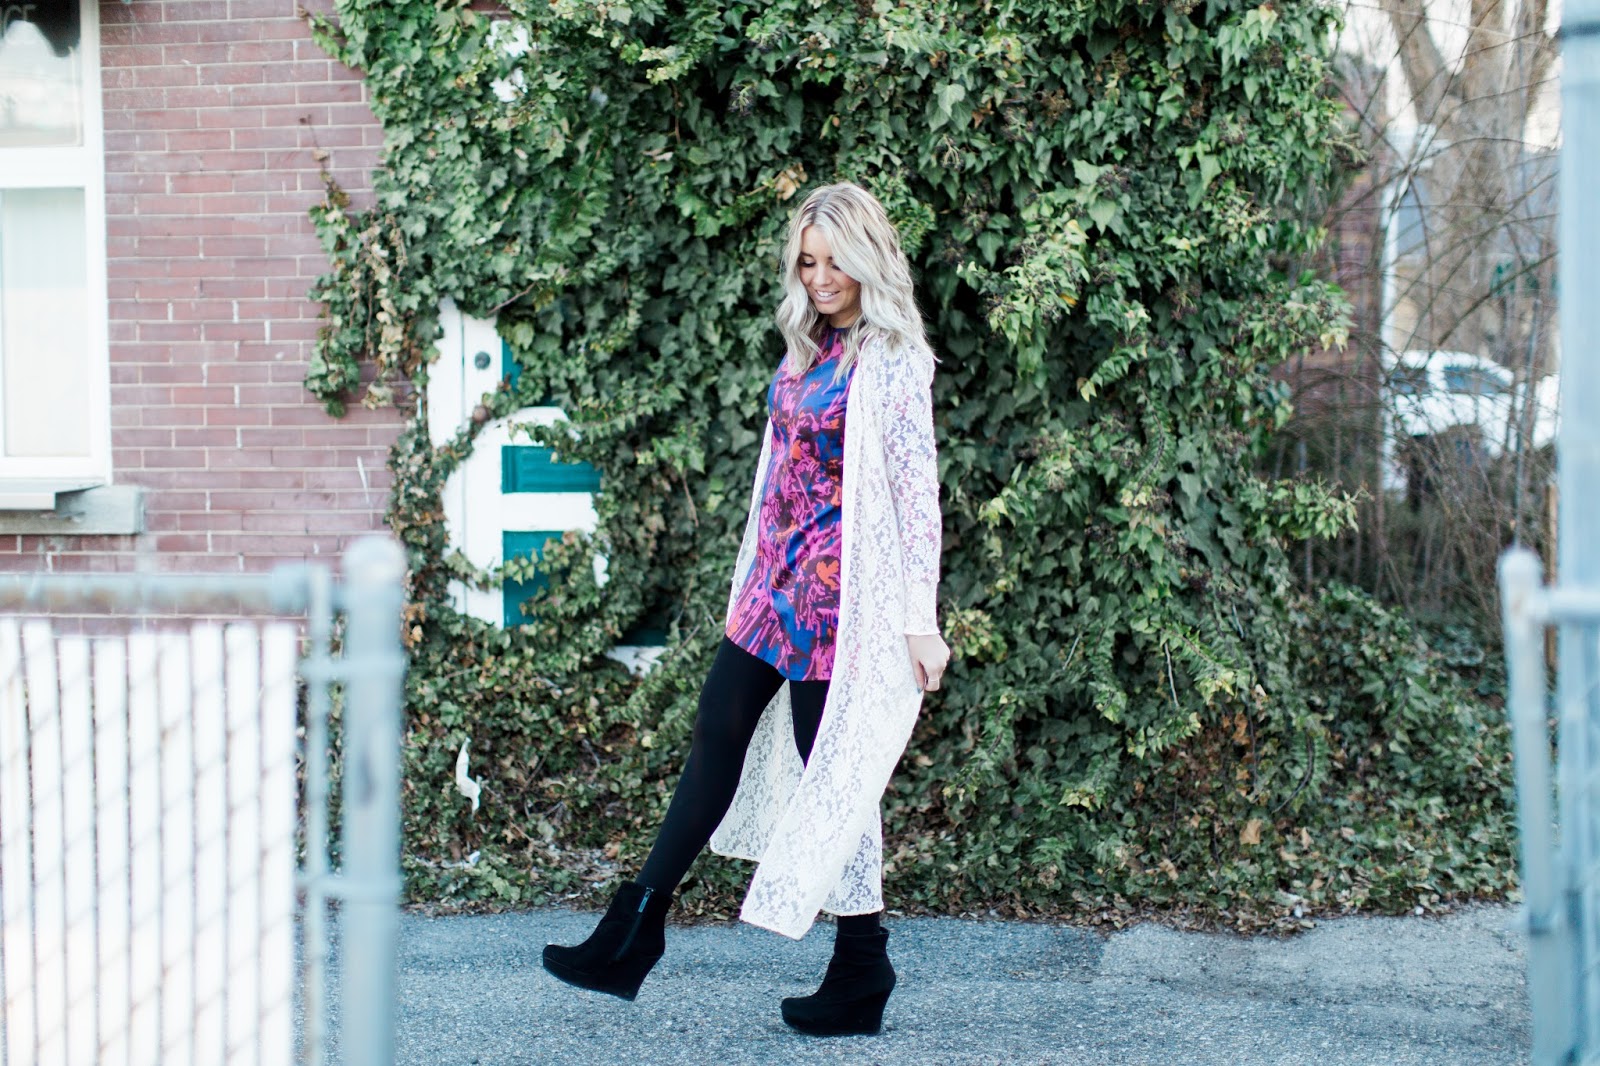 Black Wedge Booties, Floral Dress, Fashion Blogger